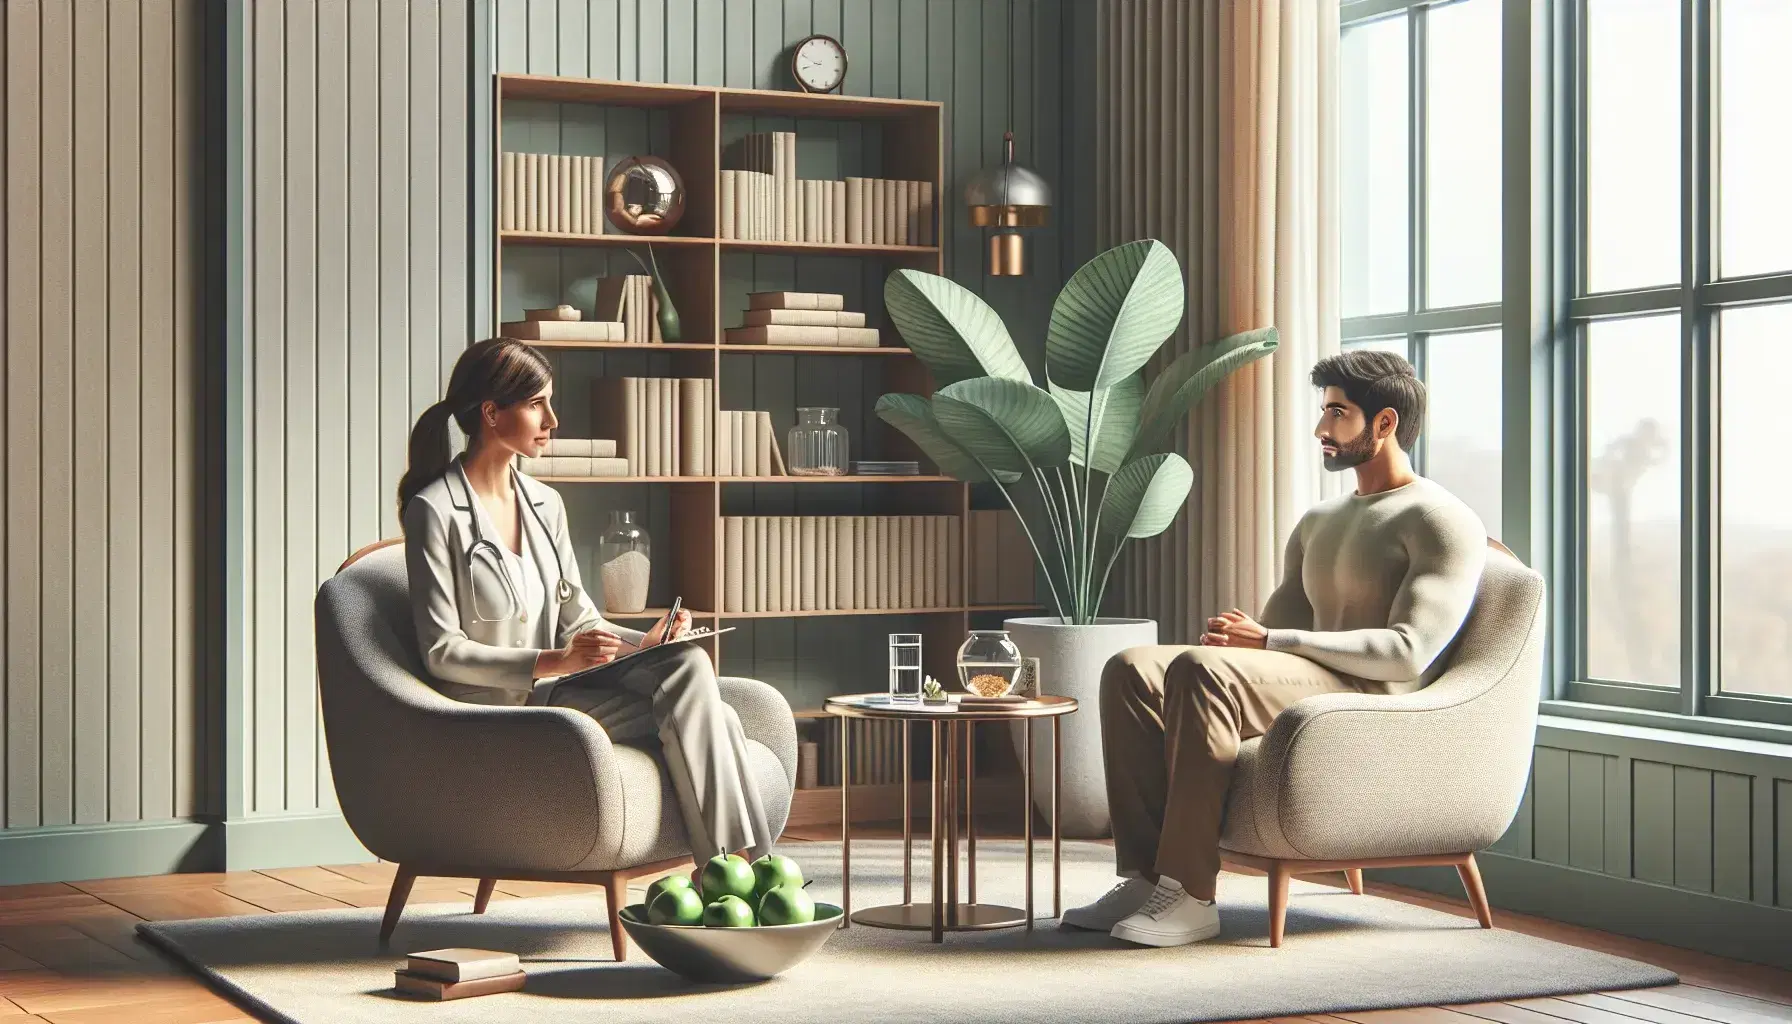 Middle Eastern female therapist and South Asian male client in bright room with bookcase, coffee table, water and green apples.